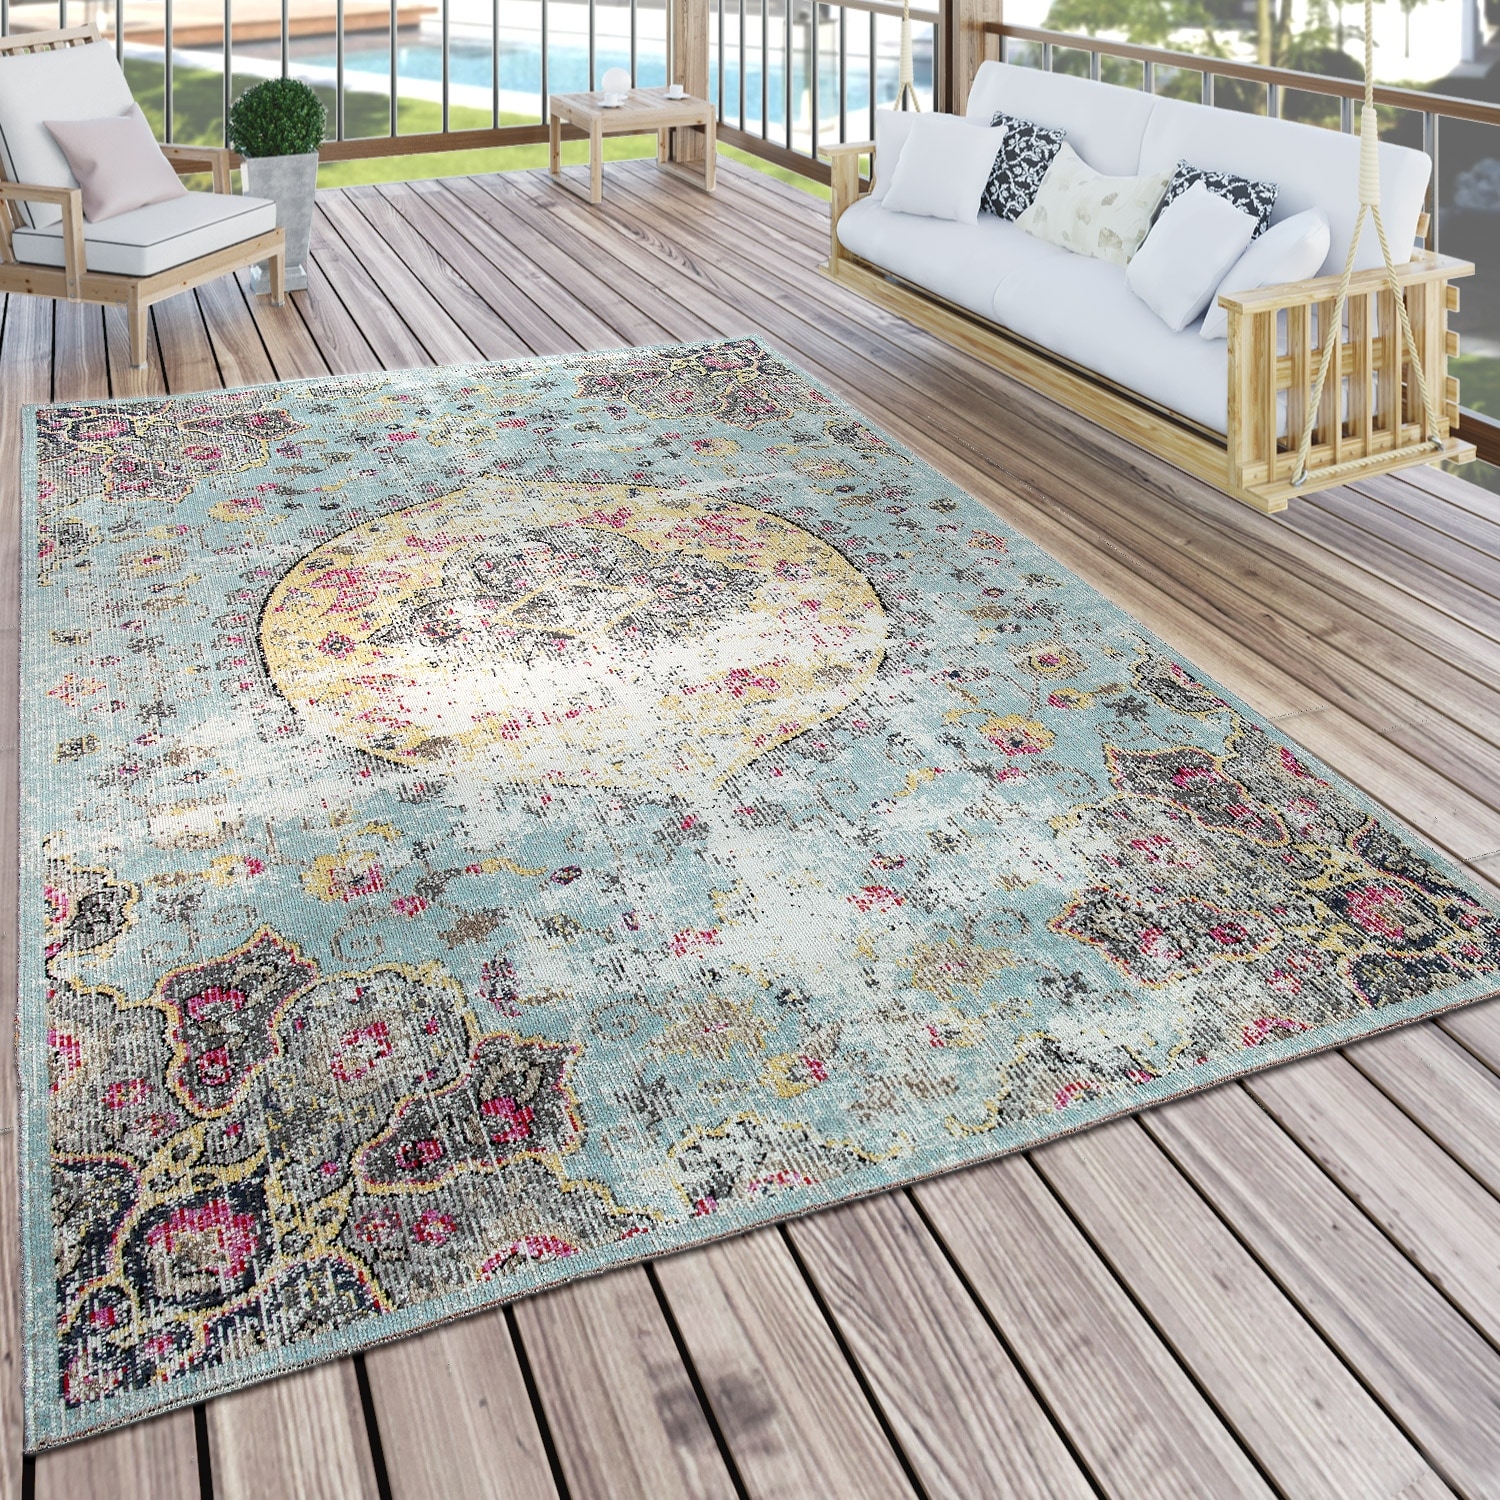 https://ak1.ostkcdn.com/images/products/is/images/direct/f561f295c3b2aa002c60f1ee4b43c8da37202351/Indoor-%26-Outdoor-Rug-Oriental-Design-in-Turquoise-Pink-Yellow-Pastel.jpg